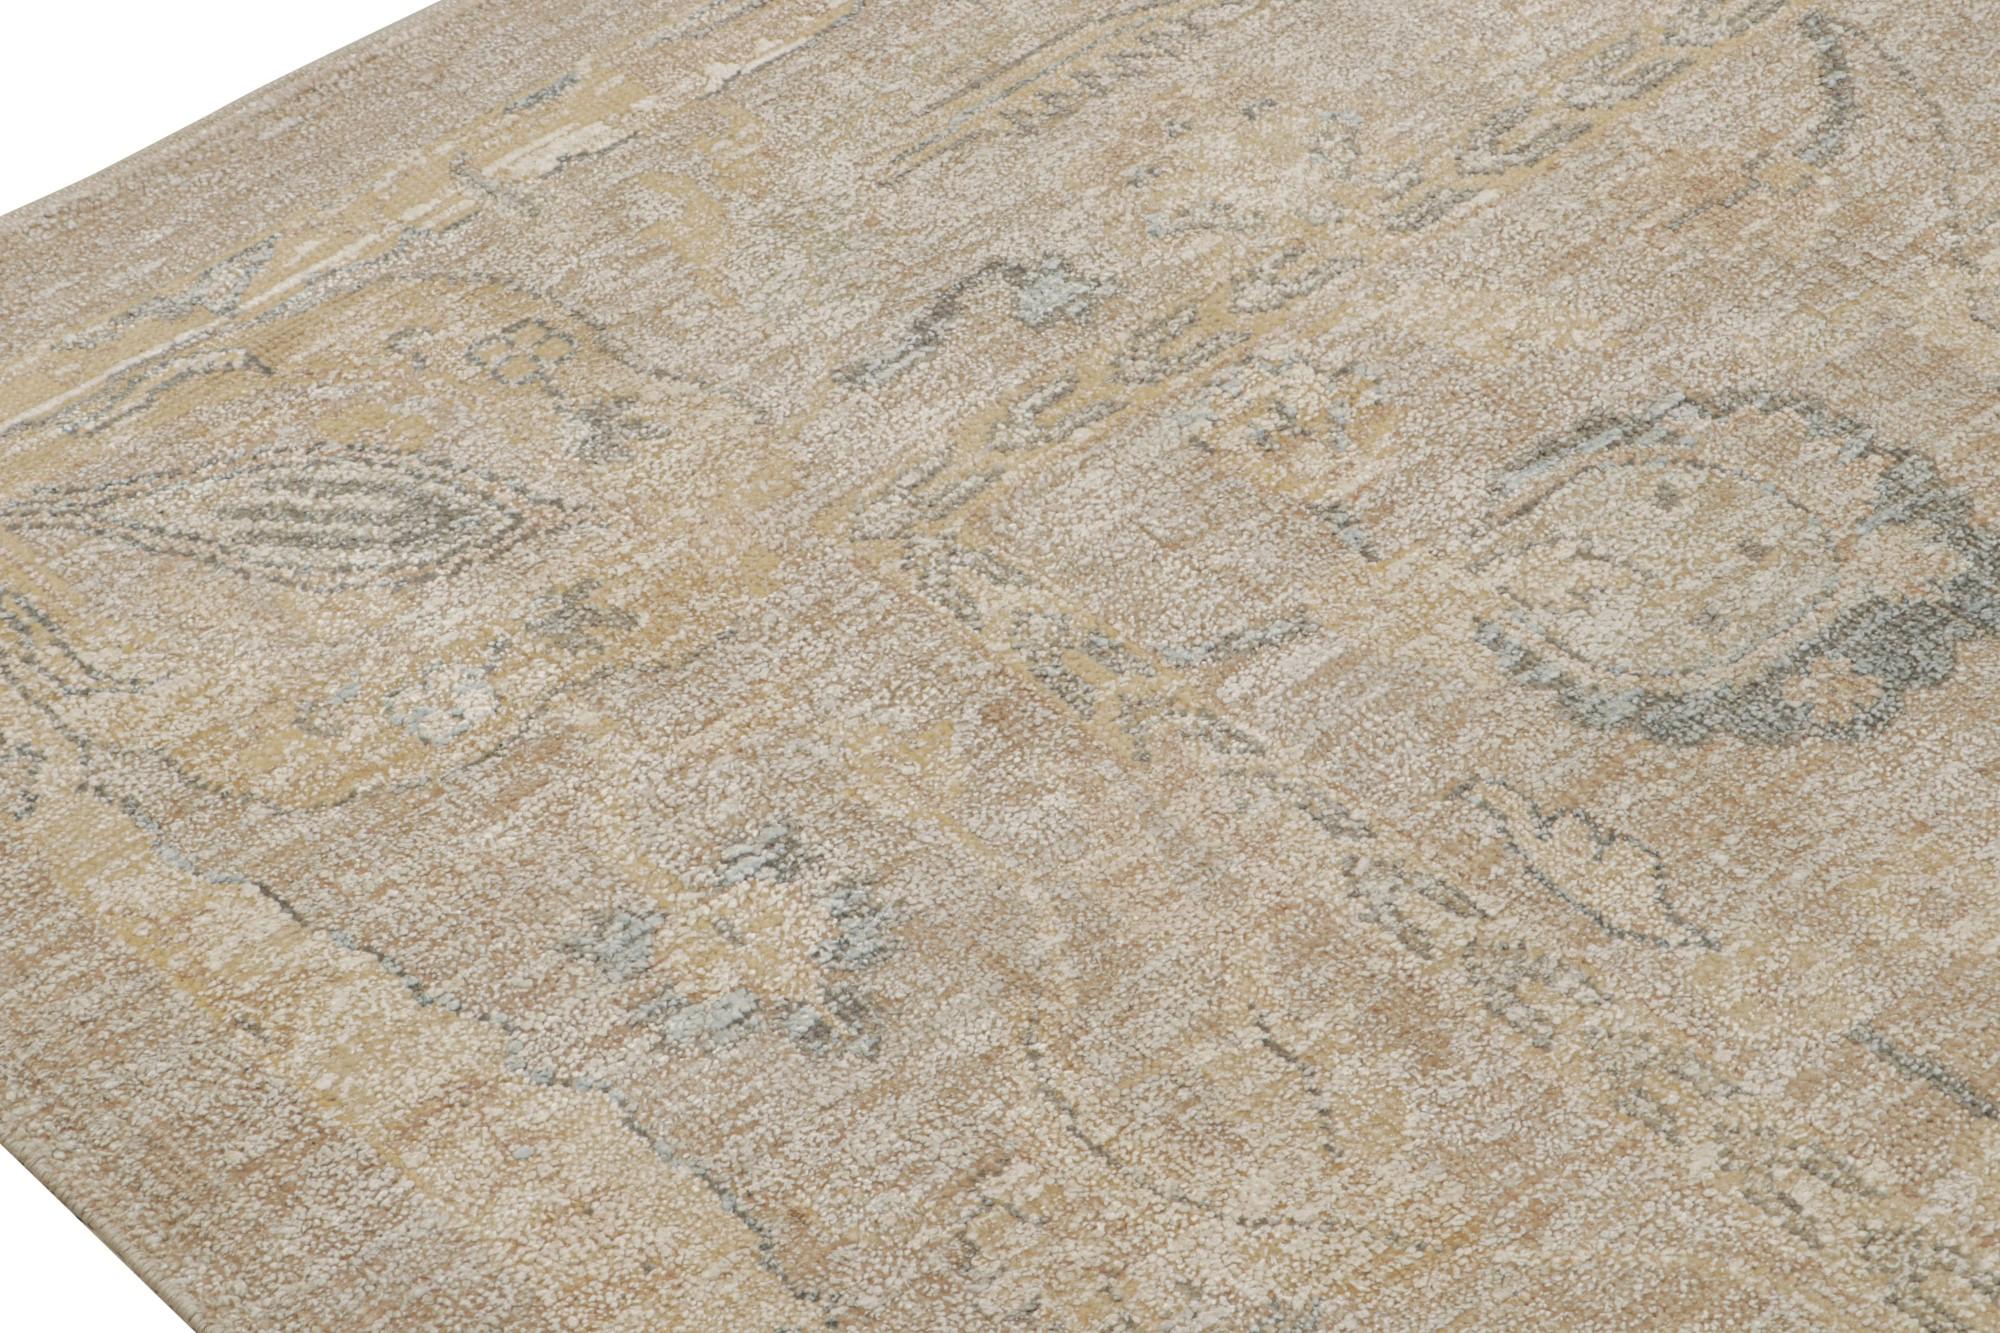 Rug & Kilim’s Oushak Style Rug in Grey, Beige & Gold Floral Pattern In New Condition For Sale In Long Island City, NY